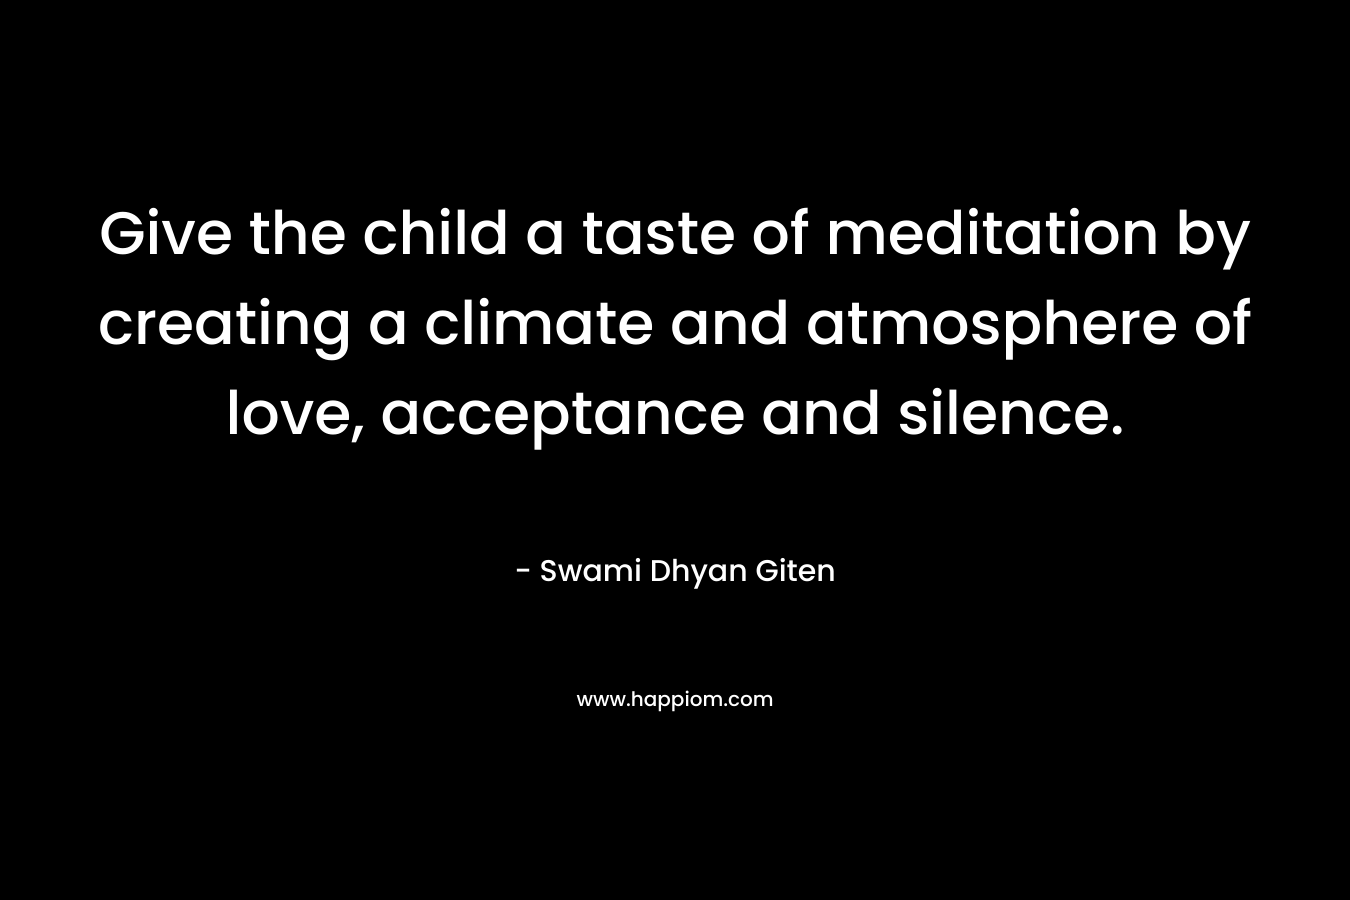 Give the child a taste of meditation by creating a climate and atmosphere of love, acceptance and silence.